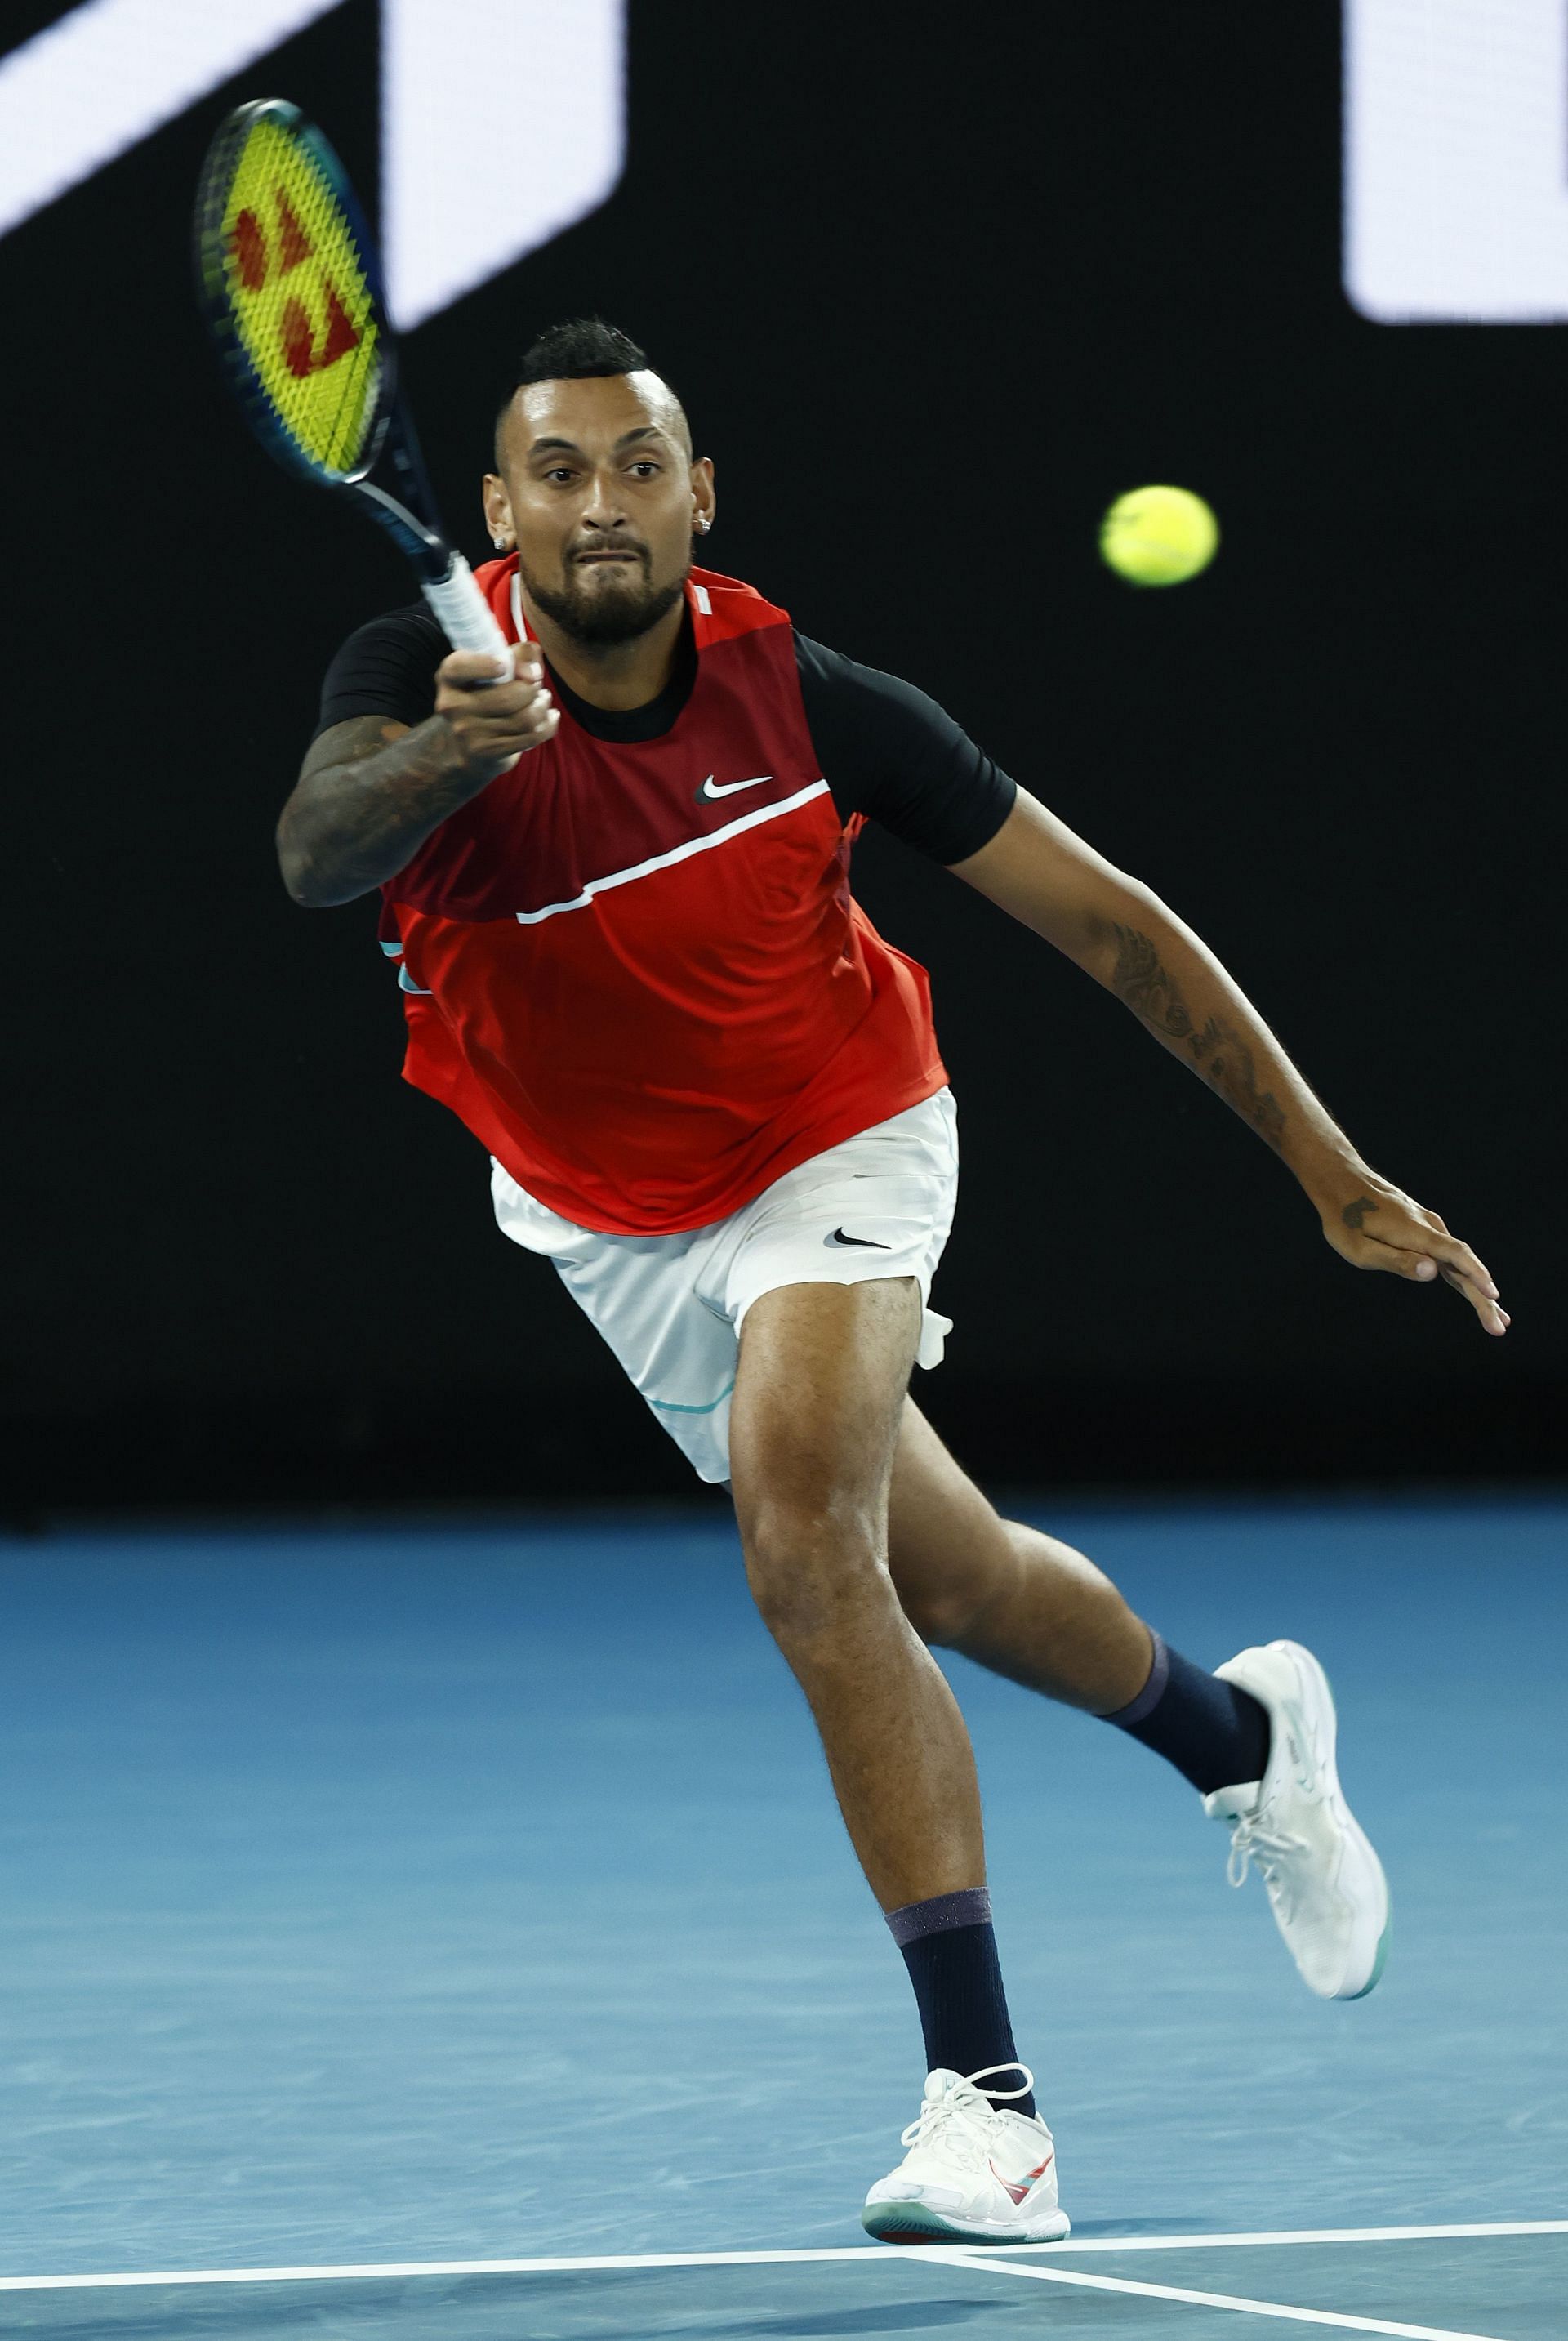 Nick Kyrgios in action at the 2022 Australian Open